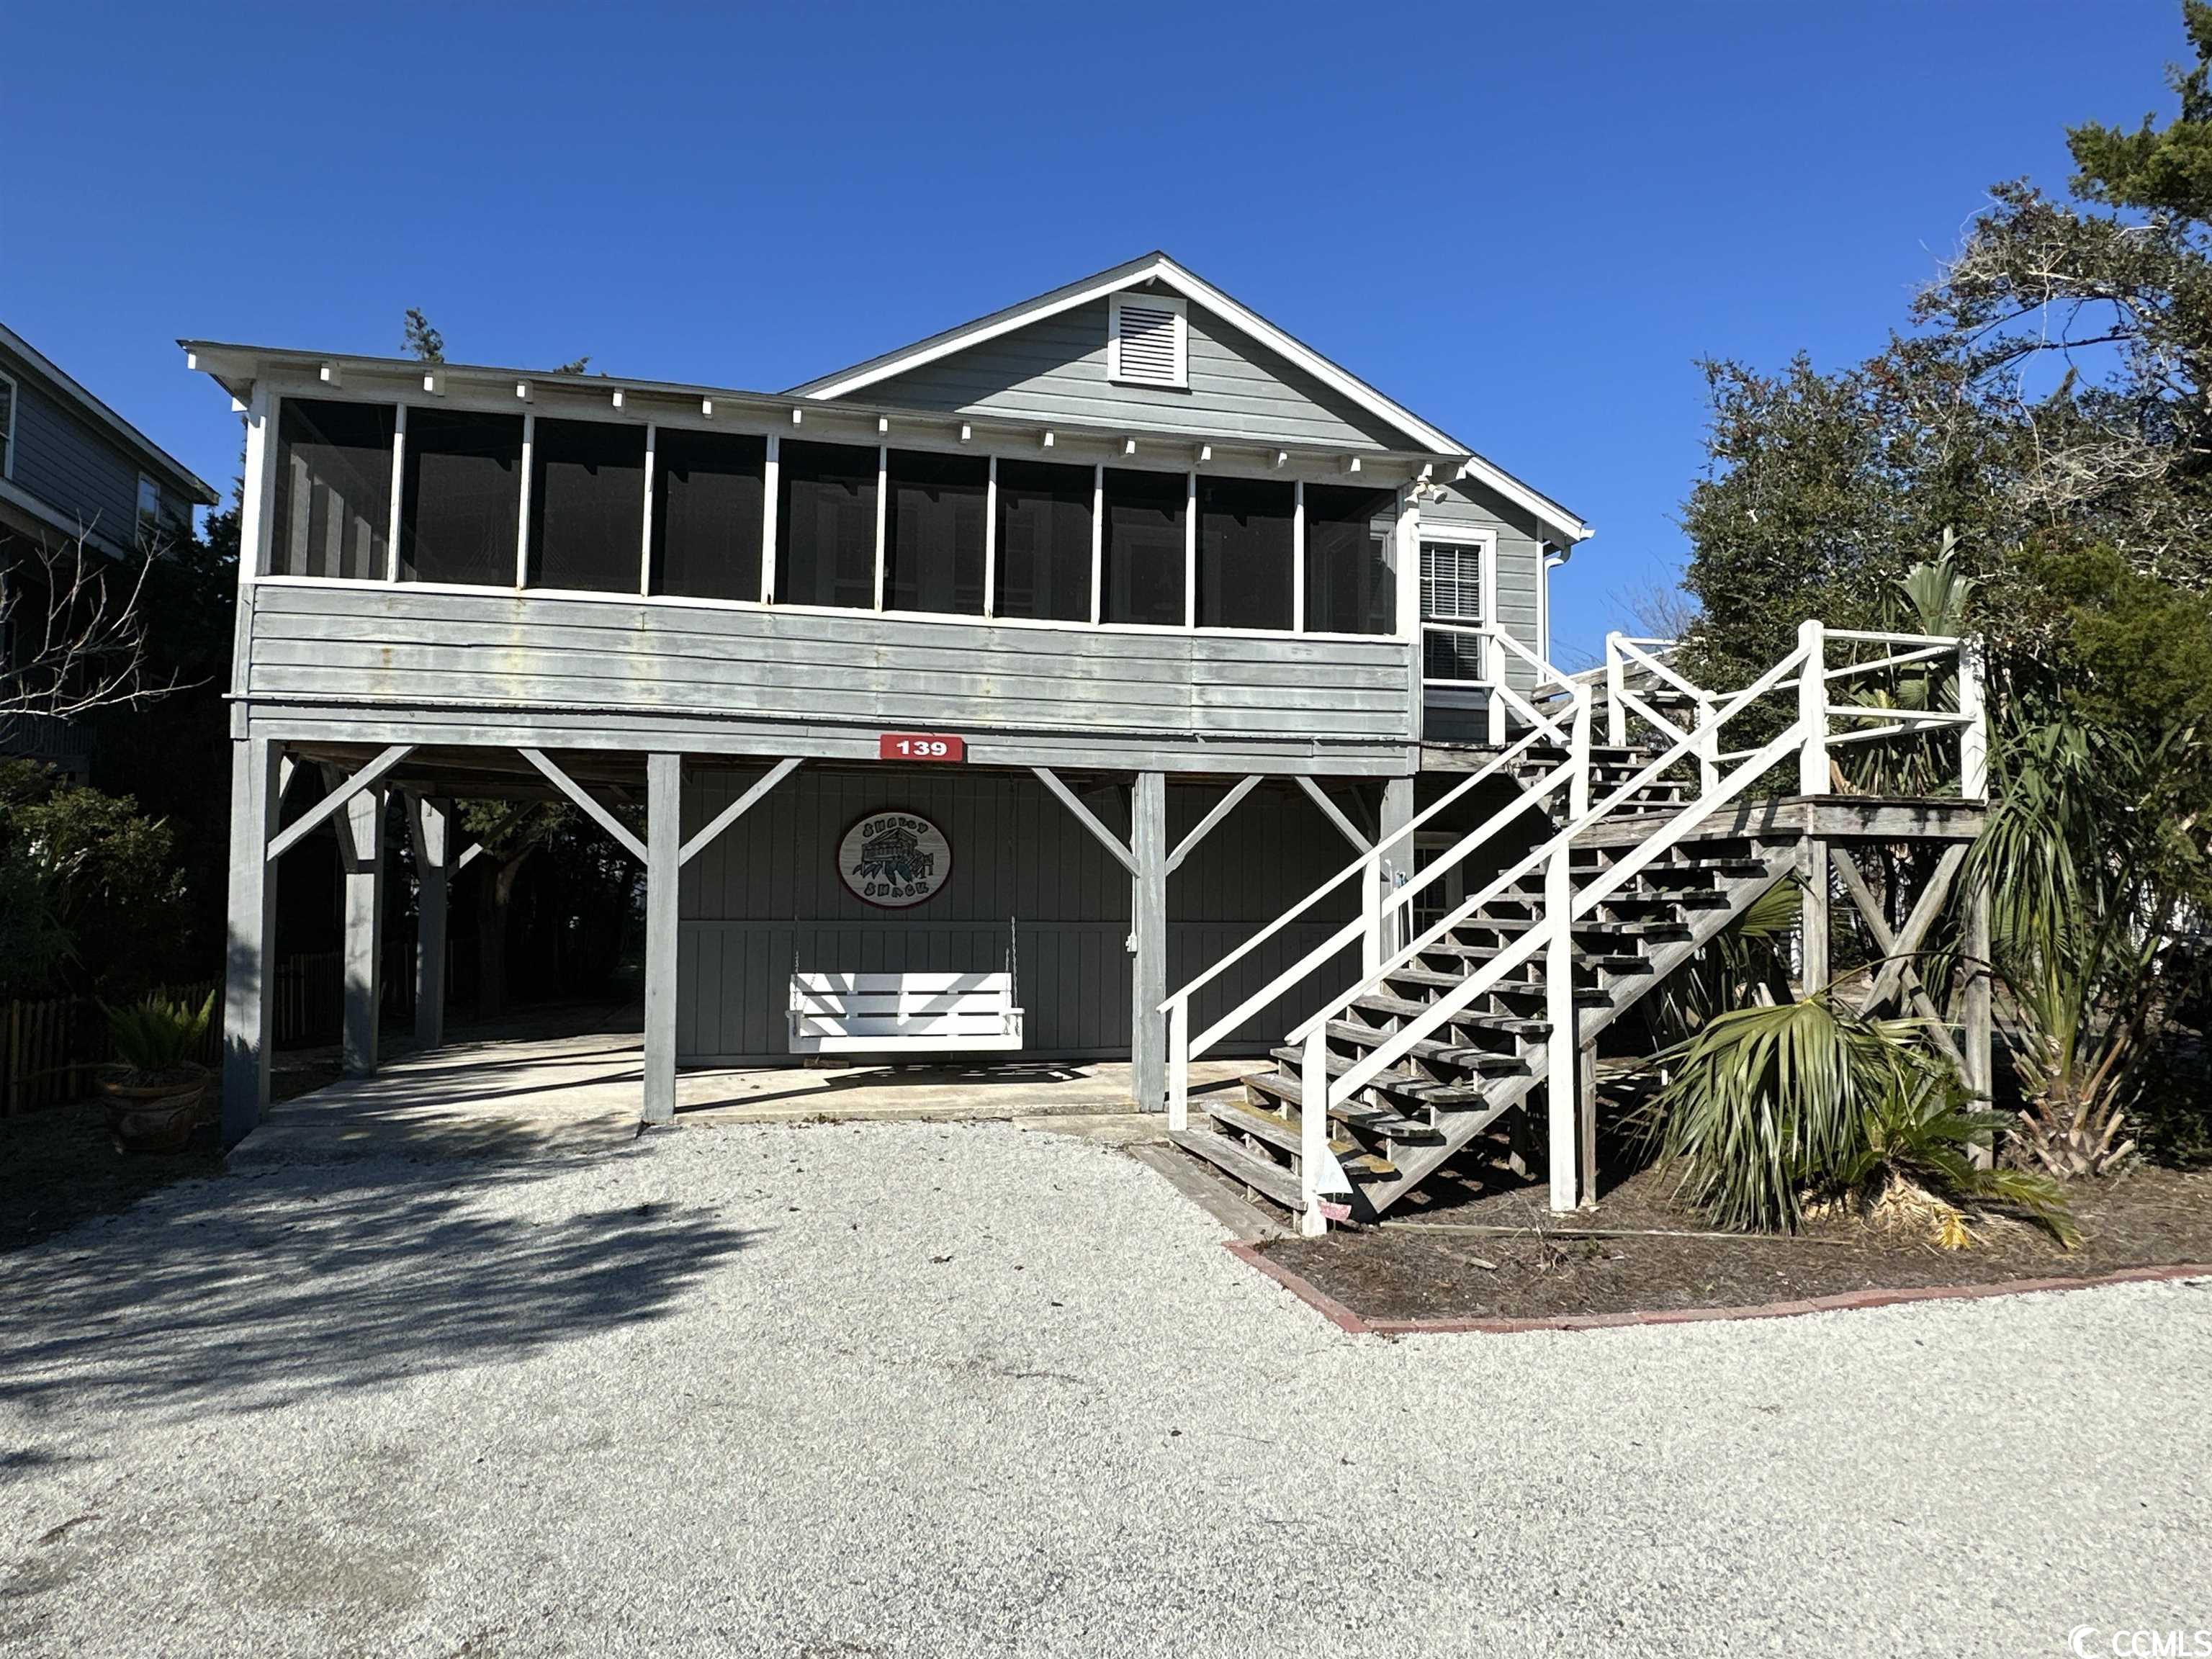 don't miss your opportunity to purchase this rare and wonderful creekfront  4 br / 3 bath home on the north end of pawleys. stunning sunset views from this great location that offers convenient access to both the beach, a public landing 1 block away, and quick boat access to both pawleys and litchfield creek as well as the ocean. sip a cup of coffee from the family room on the 2nd floor or from the downstairs rear porch as you relax a plan your day's upcoming adventure. take a quick stroll to your covered dock to check a crab trap or to enjoy a stunning pawleys island sunset with a cocktail. your private dock with floater is the perfect spot to park your skiff and do a little early morning or evening fishing. float a tube or paddle board on our picturesque, peaceful pawleys creek. the possibilities are endless! step inside this cozy cottage that still has all the charm that only pawleys island can offer. expansive porches on both the front and rear of the home filled with eating areas and a hammock that begs for quiet nap. upstairs there is 1 br and a bath with shower and then 3 more bedrooms downstairs with 2 updated baths. it a perfect layout as a full time residence, but would also make a fantastic 2nd home or rental investment.  friends and family will enjoy this home's quick access to the beach for a morning walk with the dog or a leisurely bicycle ride. plenty of parking for 6 or more cars and storage both under the house and in the rear. close to all of pawleys awesome restaurants and just 30 minutes to the airport and a little more than an hour to historic charleston. historic georgetown and popular murrells inlet are just a short drive as well.  come grab your little piece of paradise today and start living the pawleys island dream life!